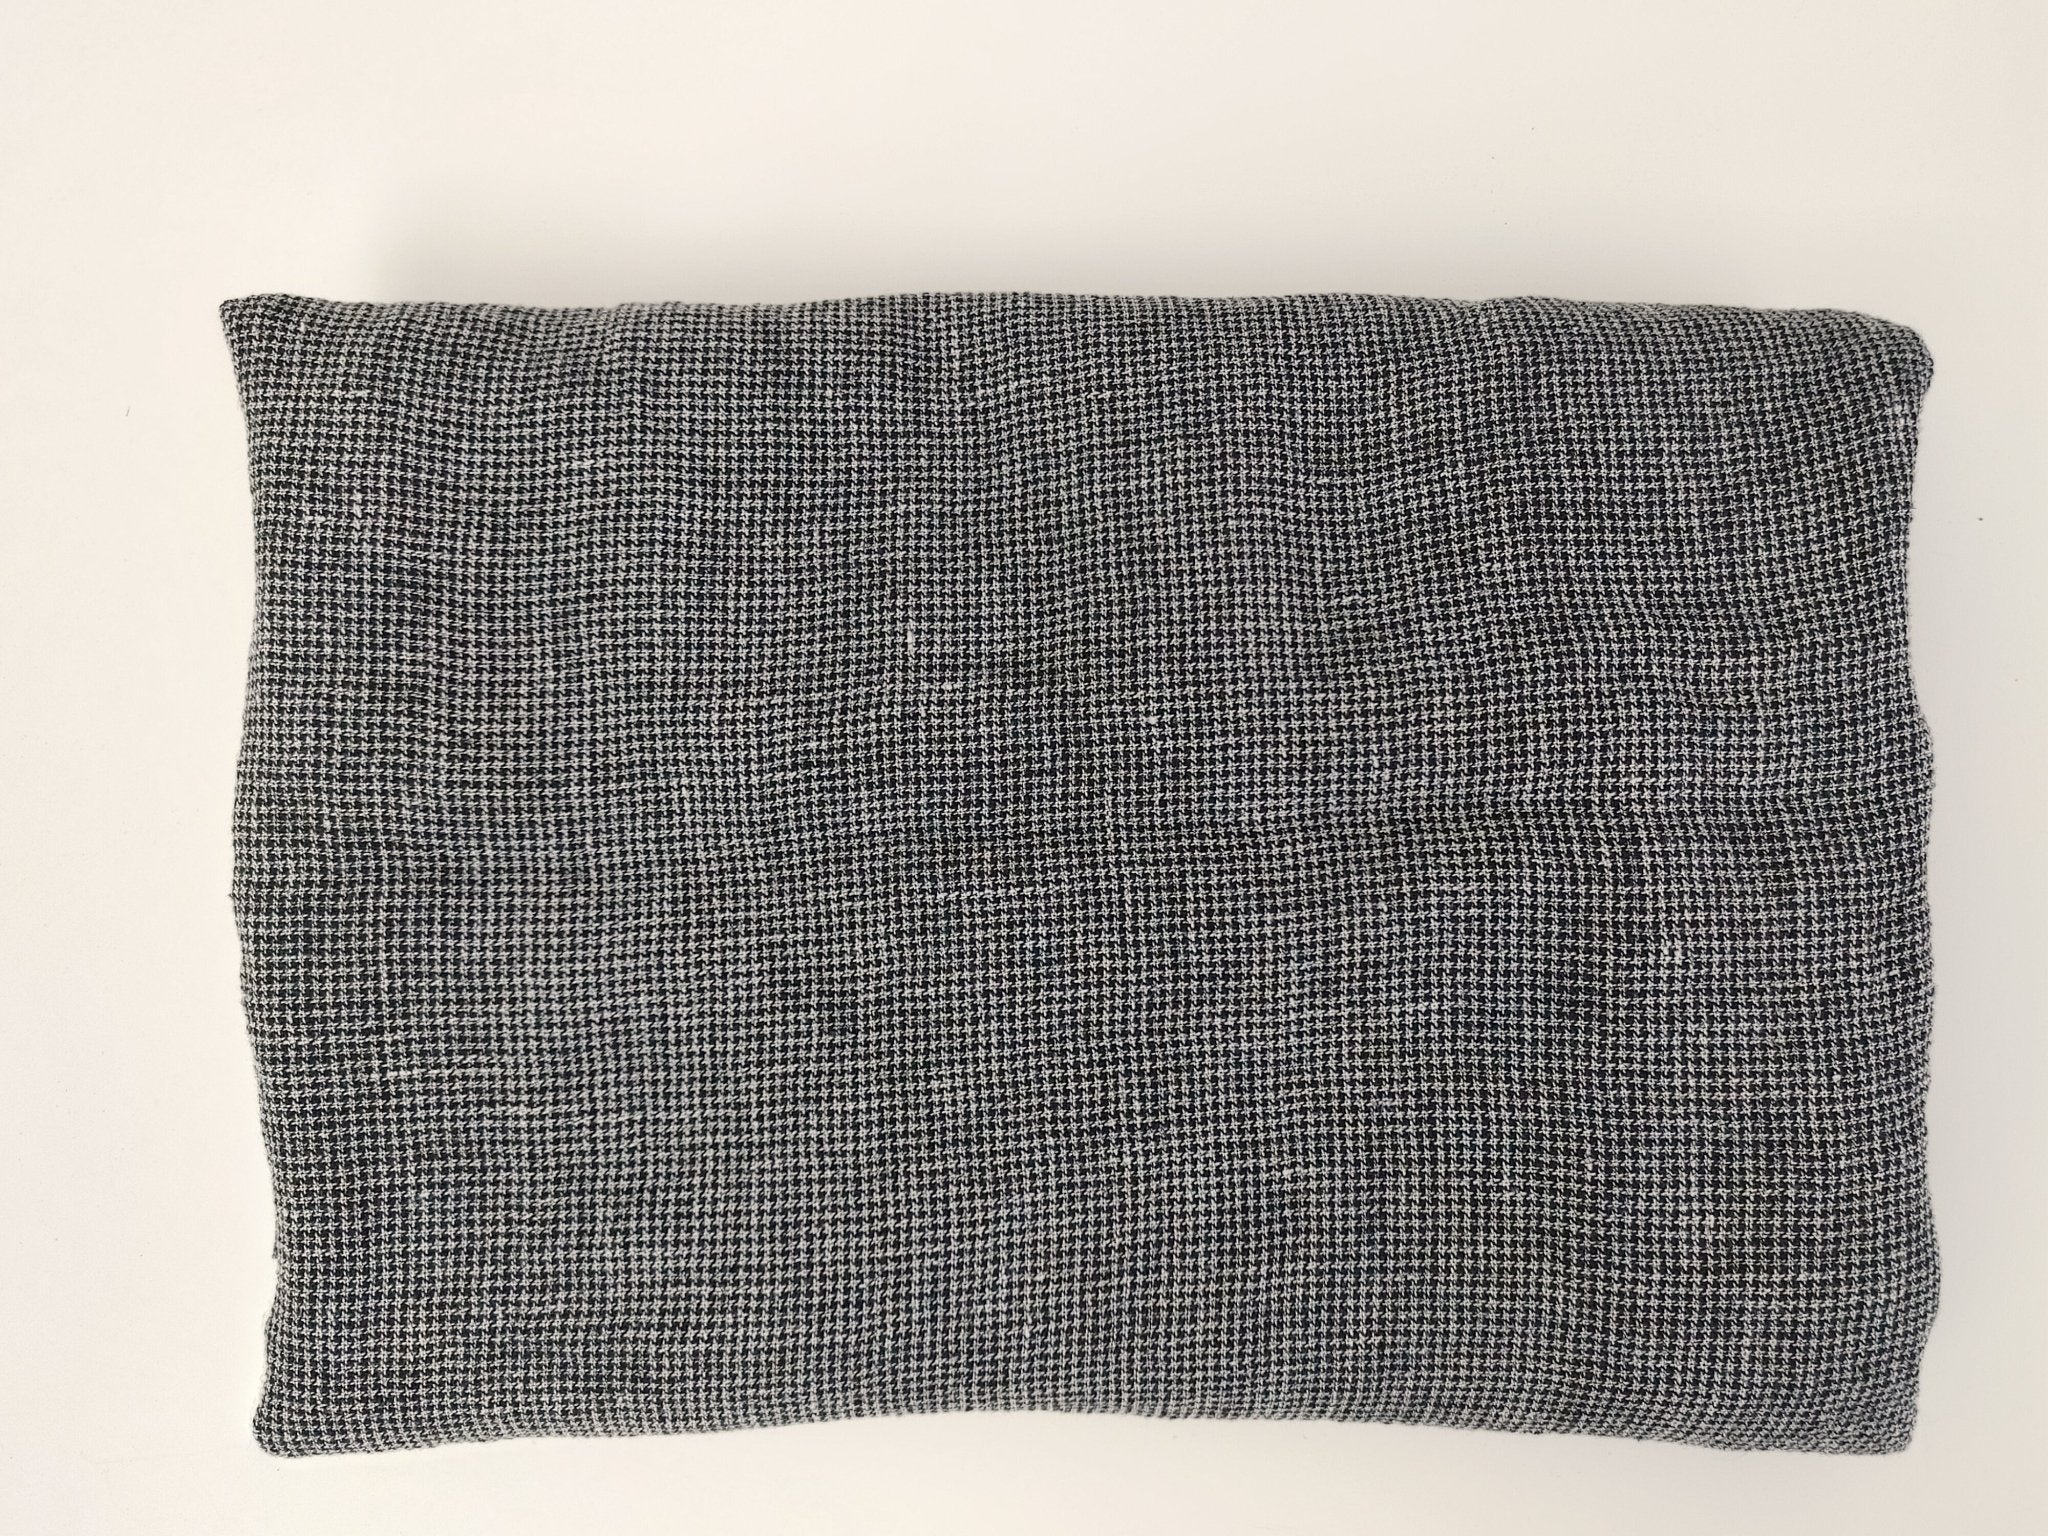 Linen Polyester Houndstooth Starcheck High-Twisted Yarn 7166 - The Linen Lab - Grey